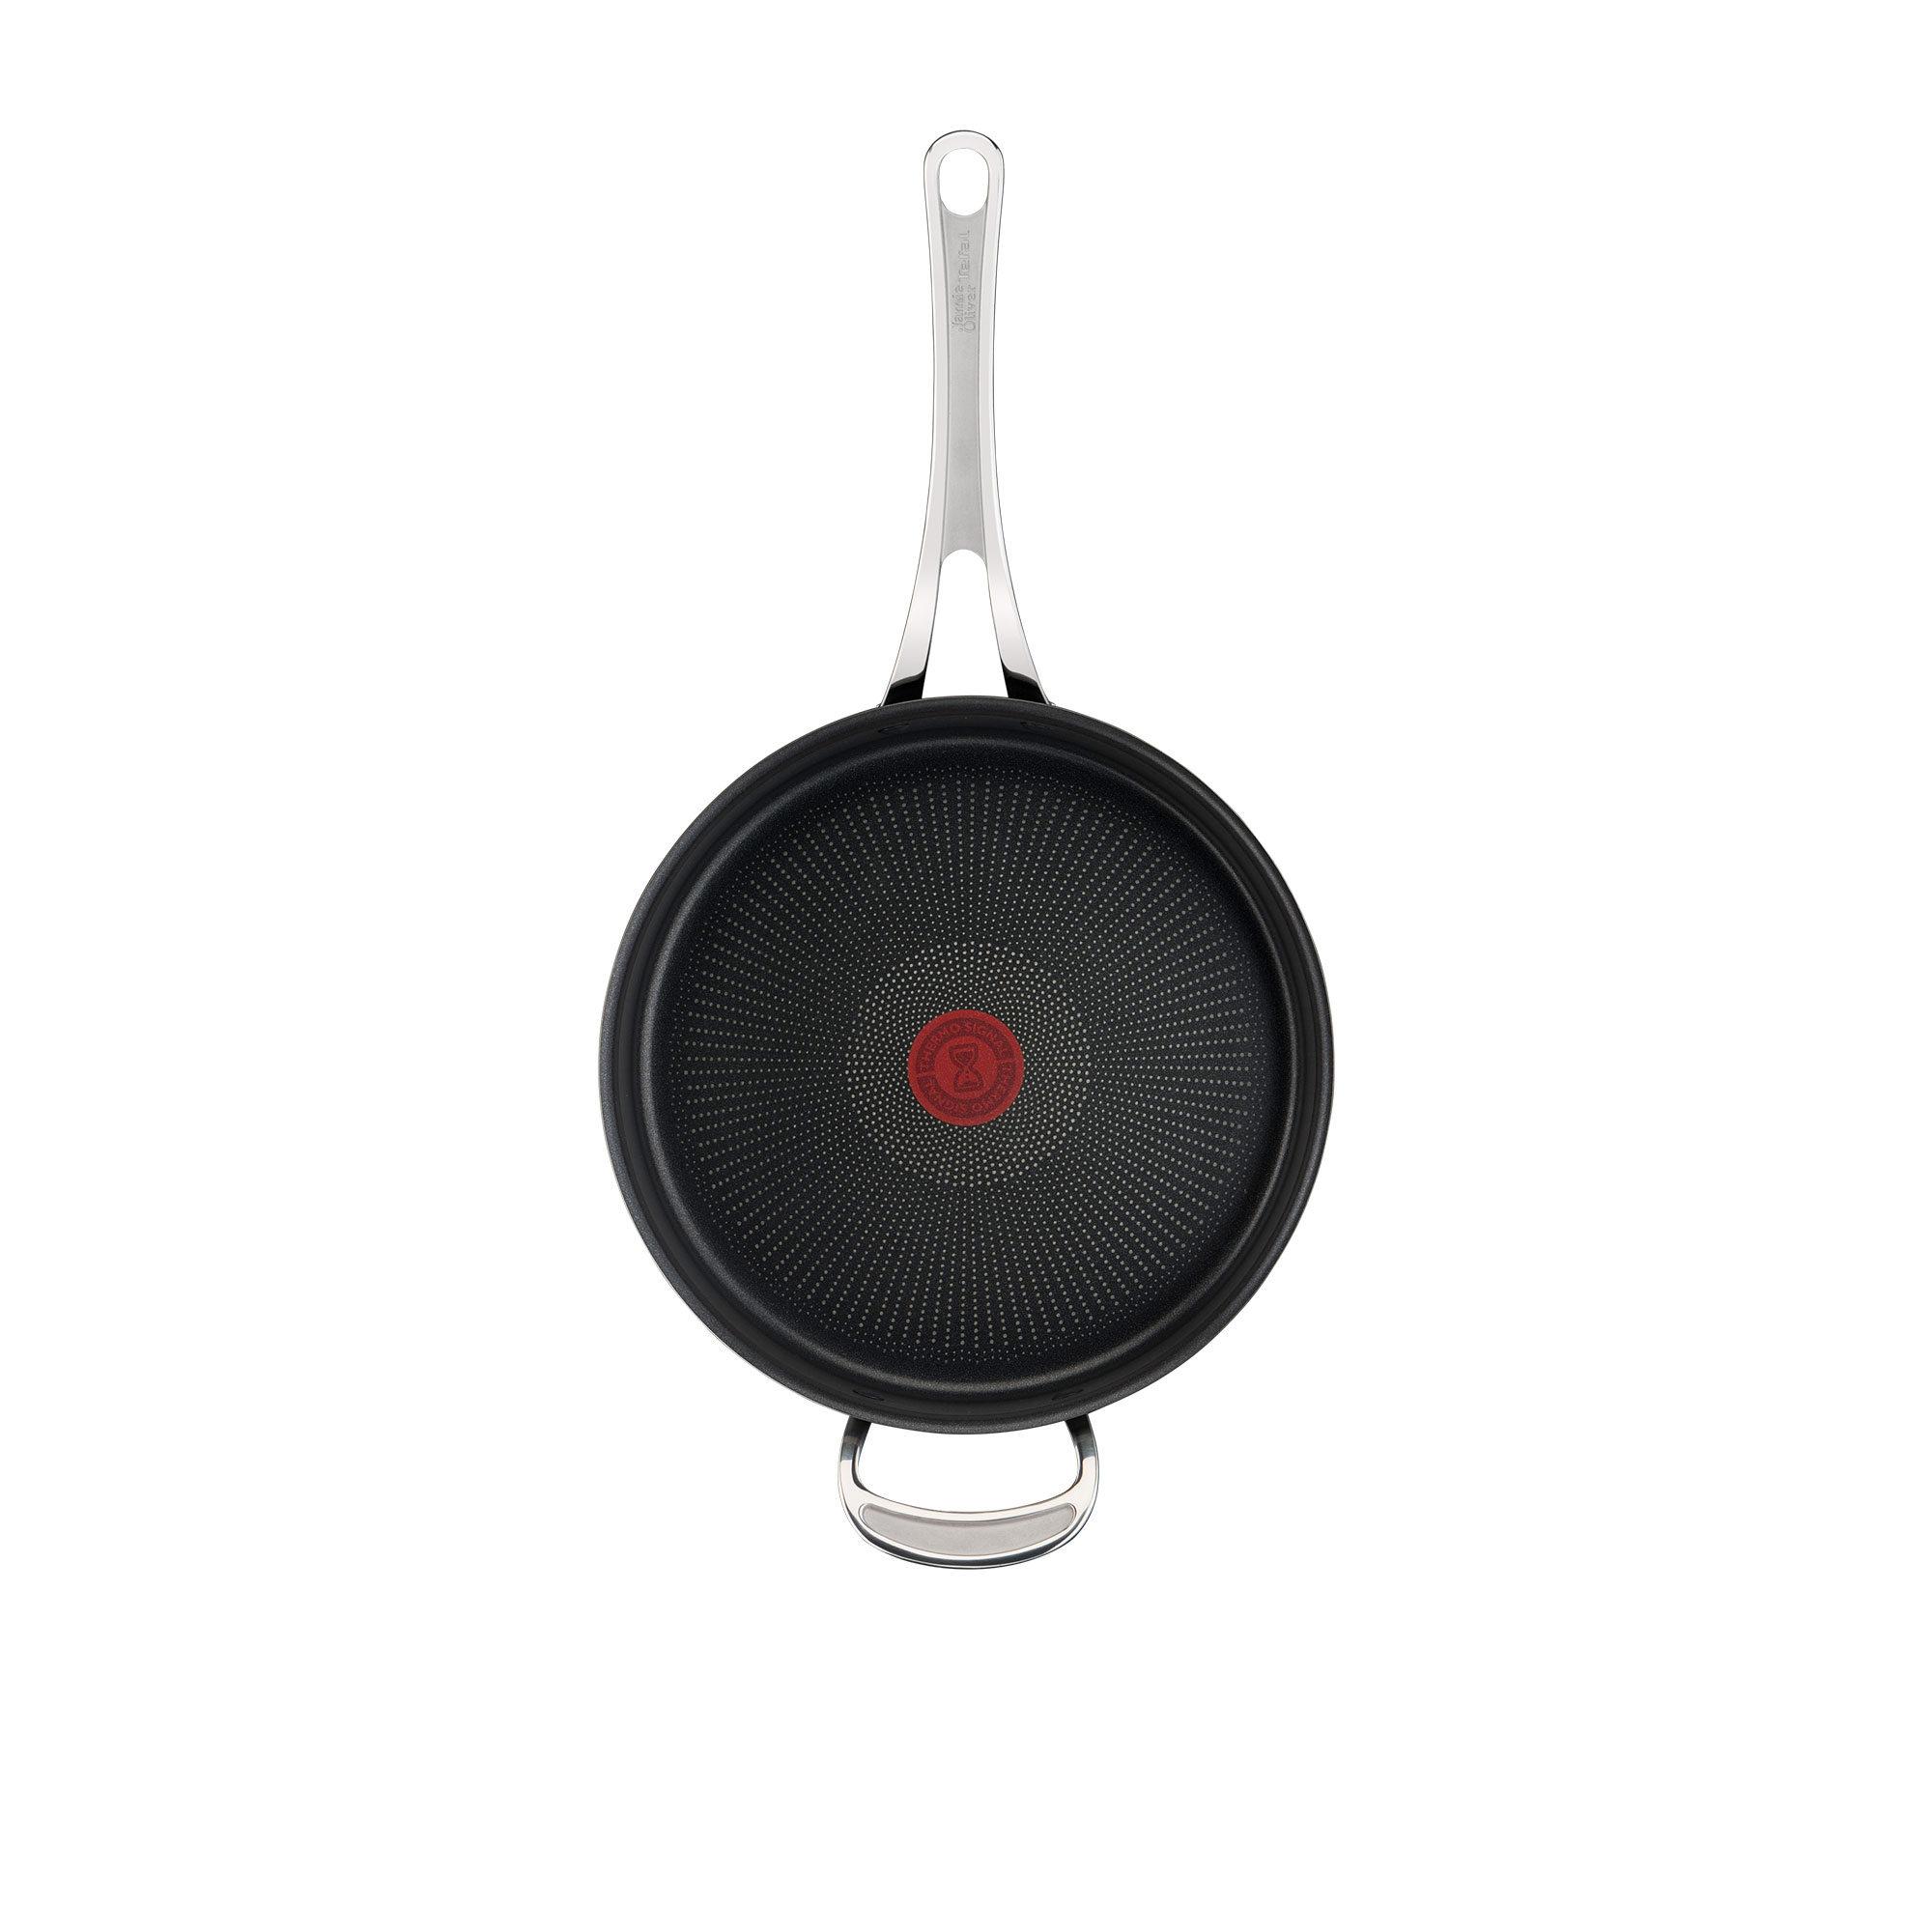 Jamie Oliver by Tefal Cook's Classic Hard Anodised Induction Saute Pan 26cm Image 5